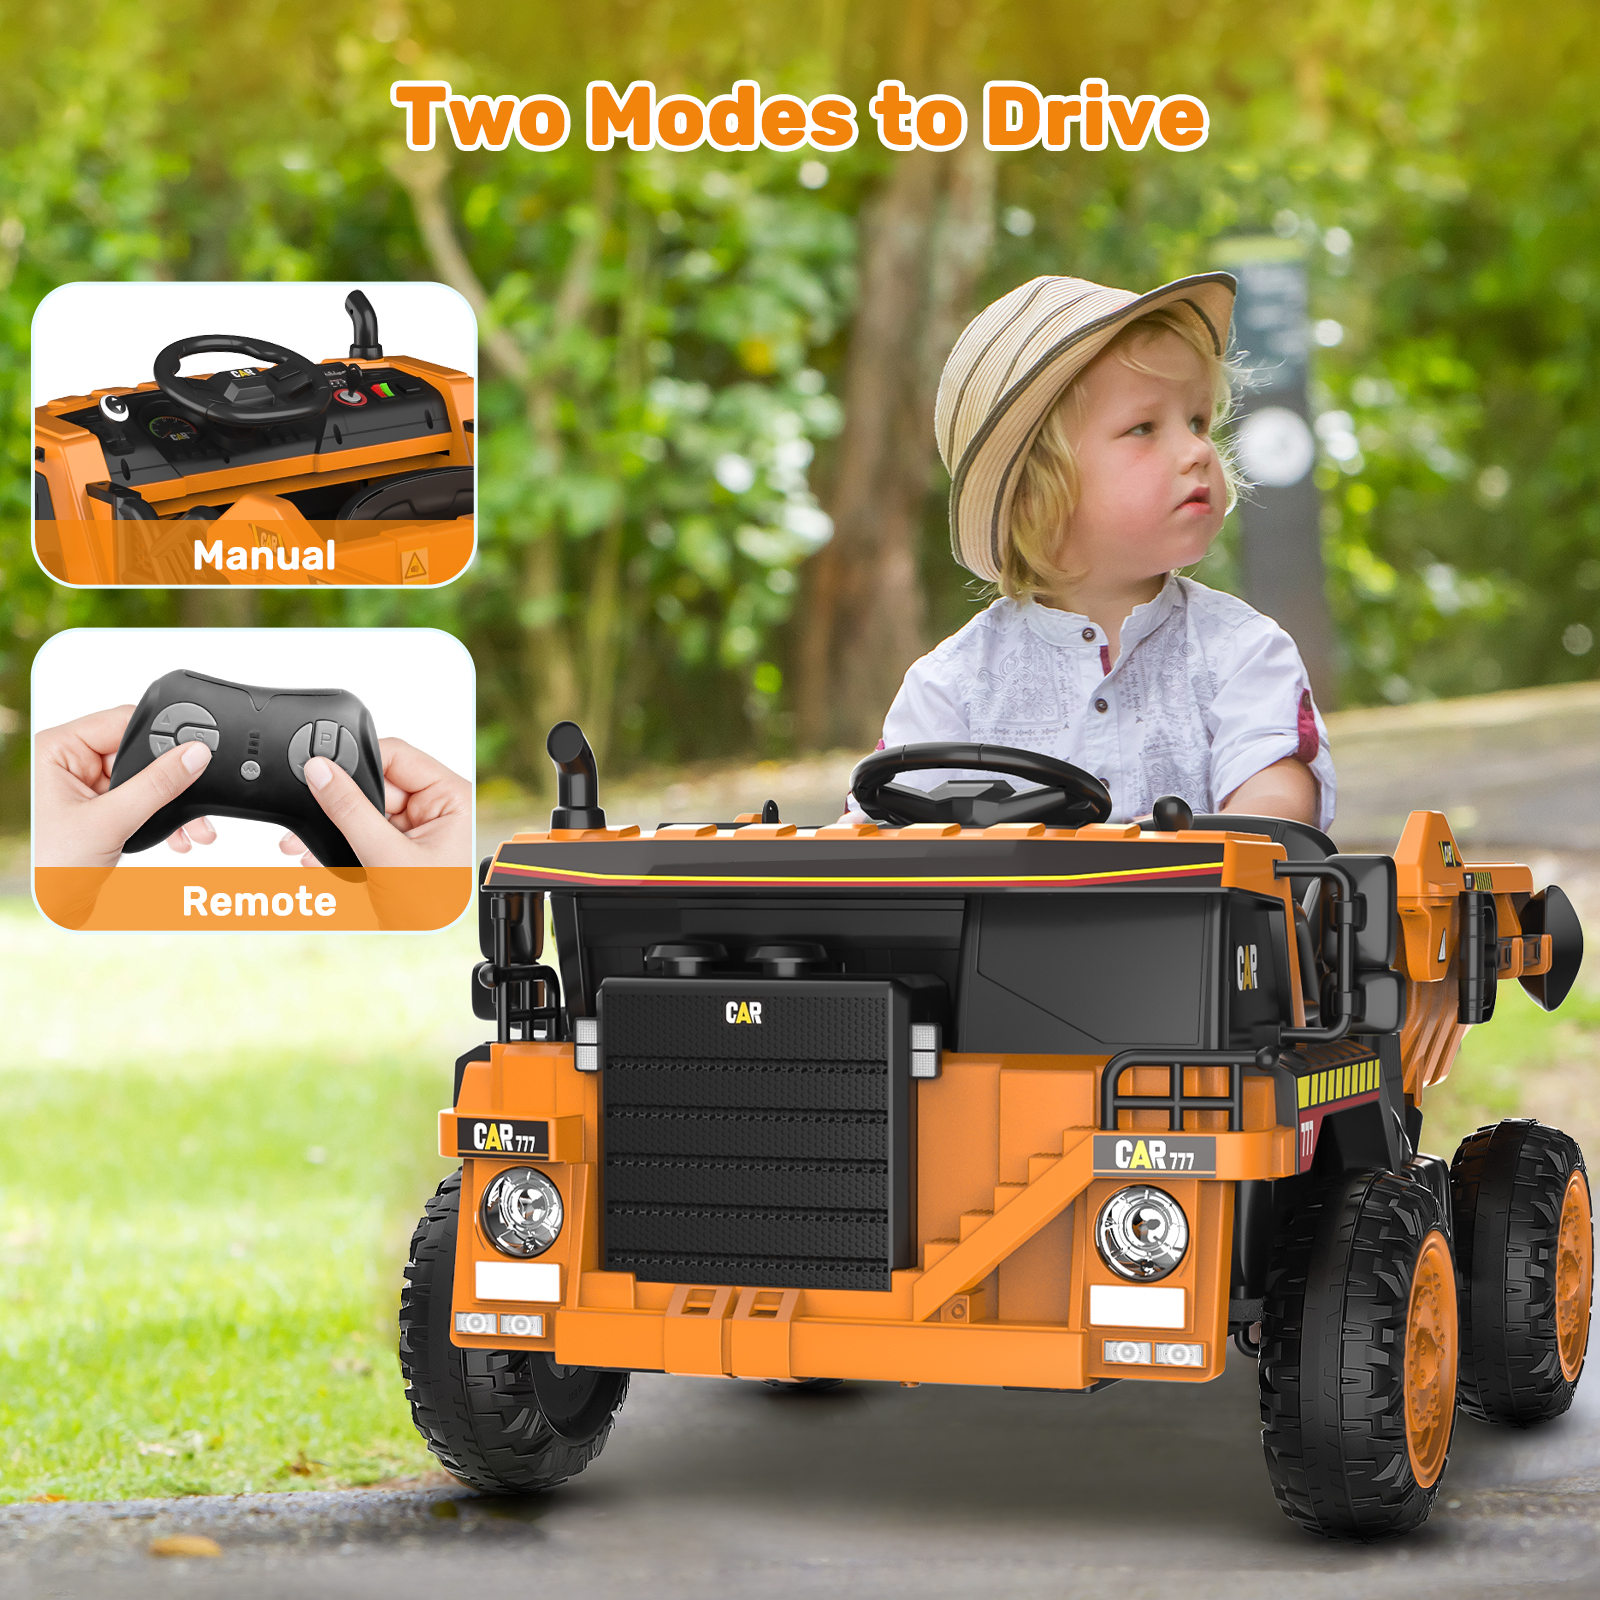 TOKTOO 12V Battery Powered Ride-on Dump Truck with Remote Control, Music Player, Electric Dump Bucket, Kids Tractor -Ginger Yellow - image 3 of 7